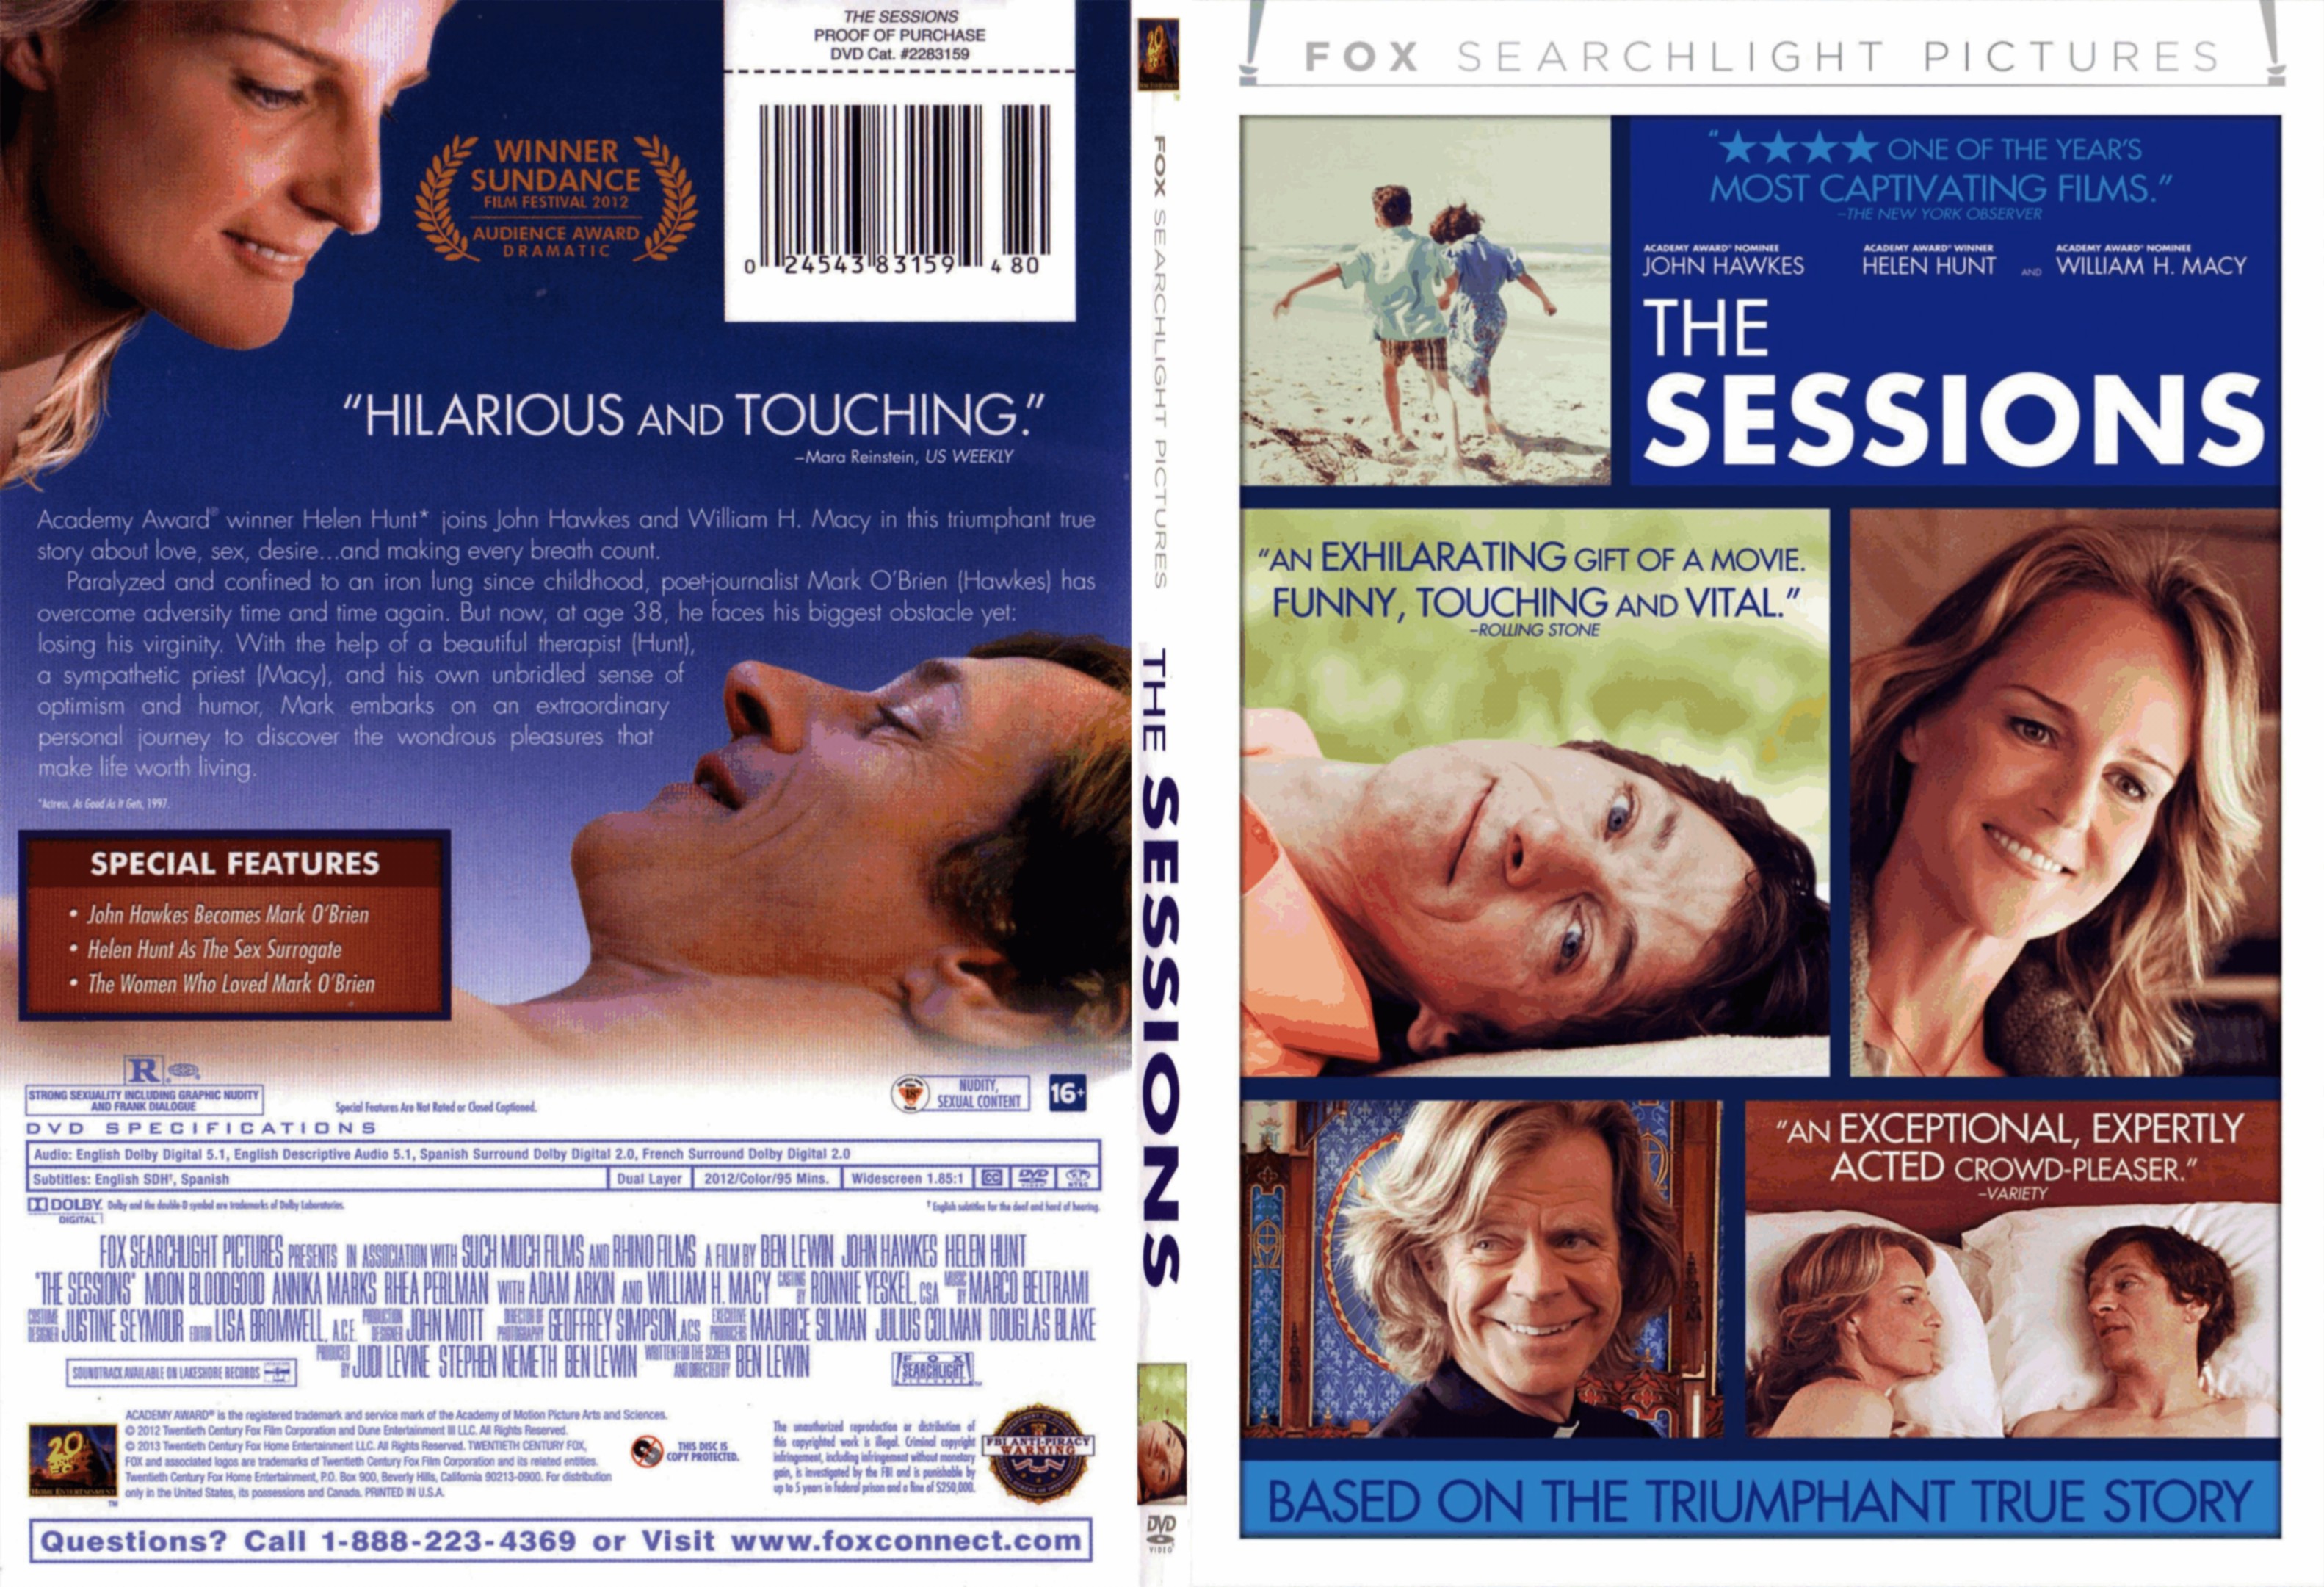 Jaquette DVD The Sessions - SLIM